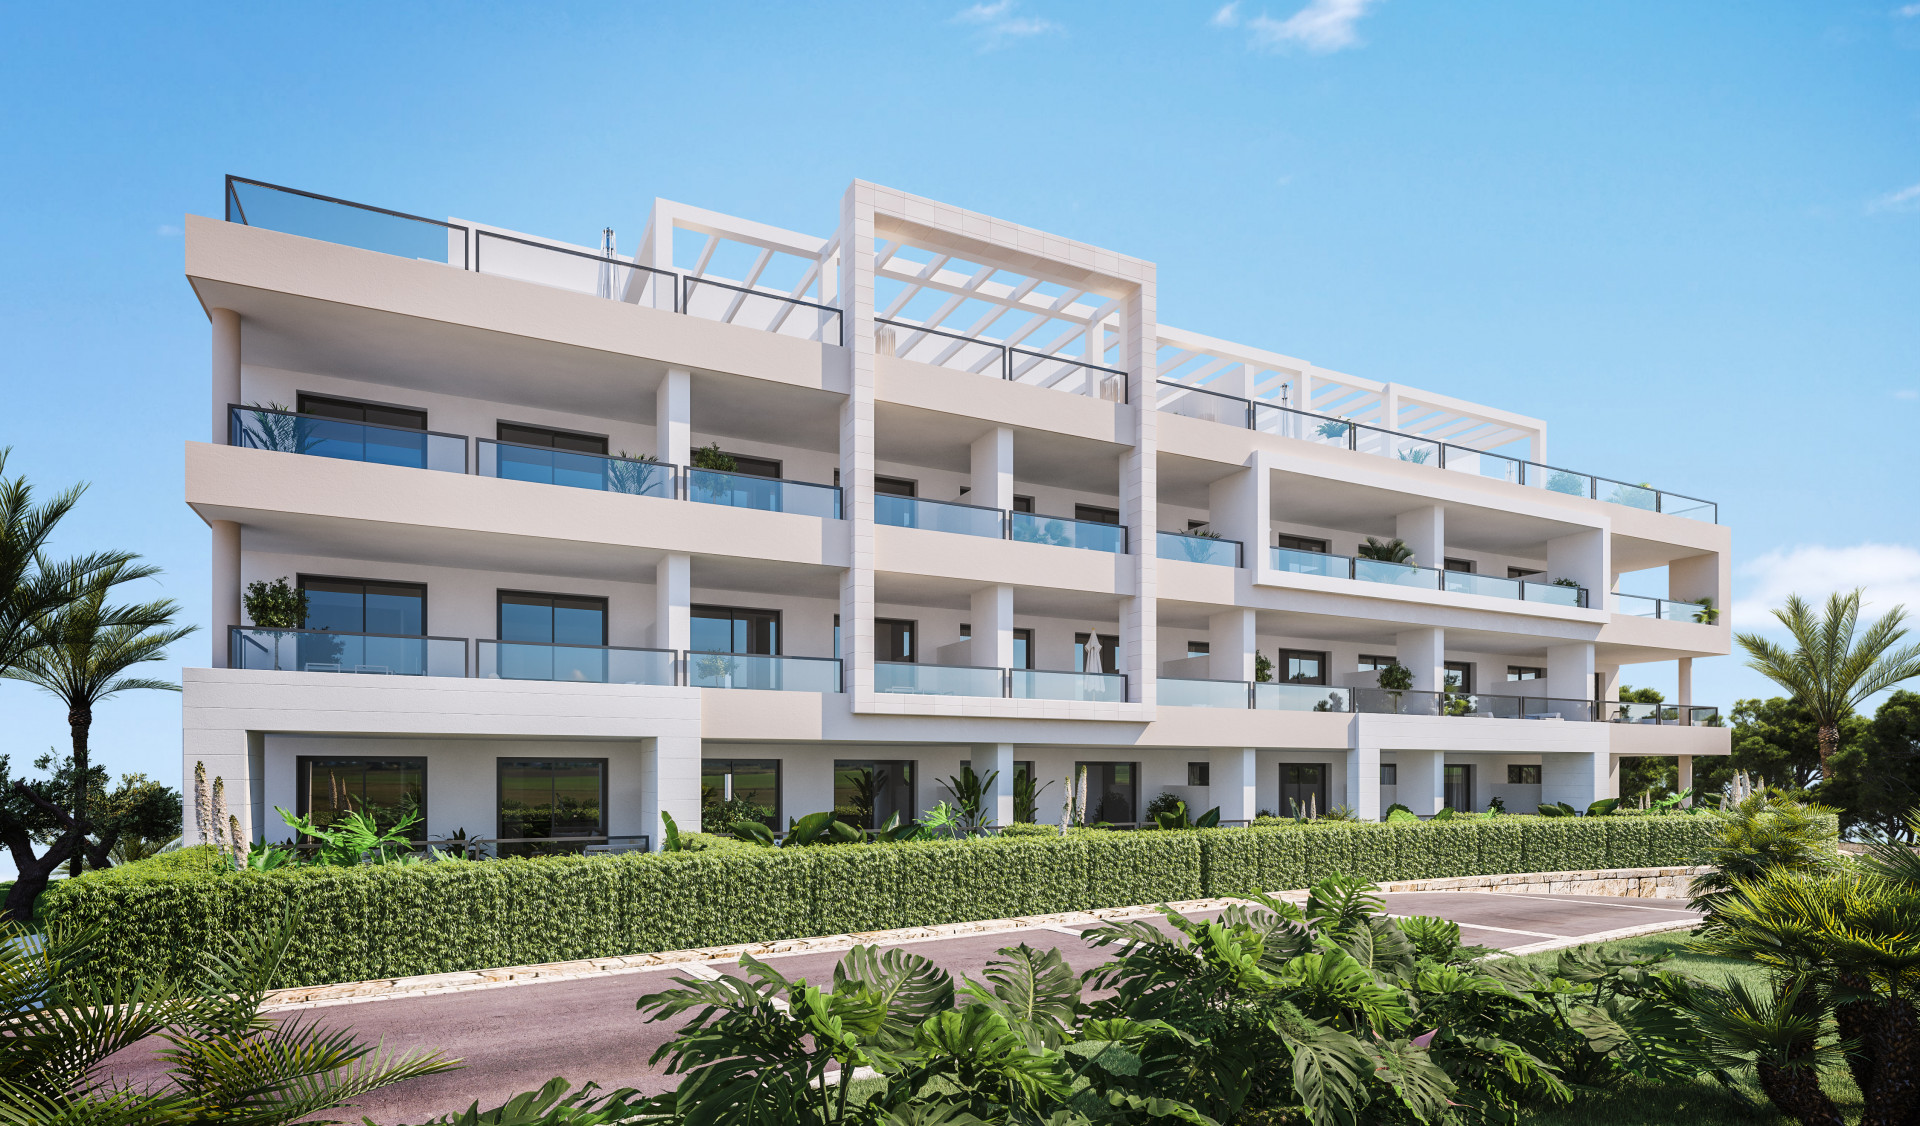 Dream Golf Calanova: Luxury residential project located on the first line of the Calanova golf course in the municipality of Mijas, Malaga. | Image 3